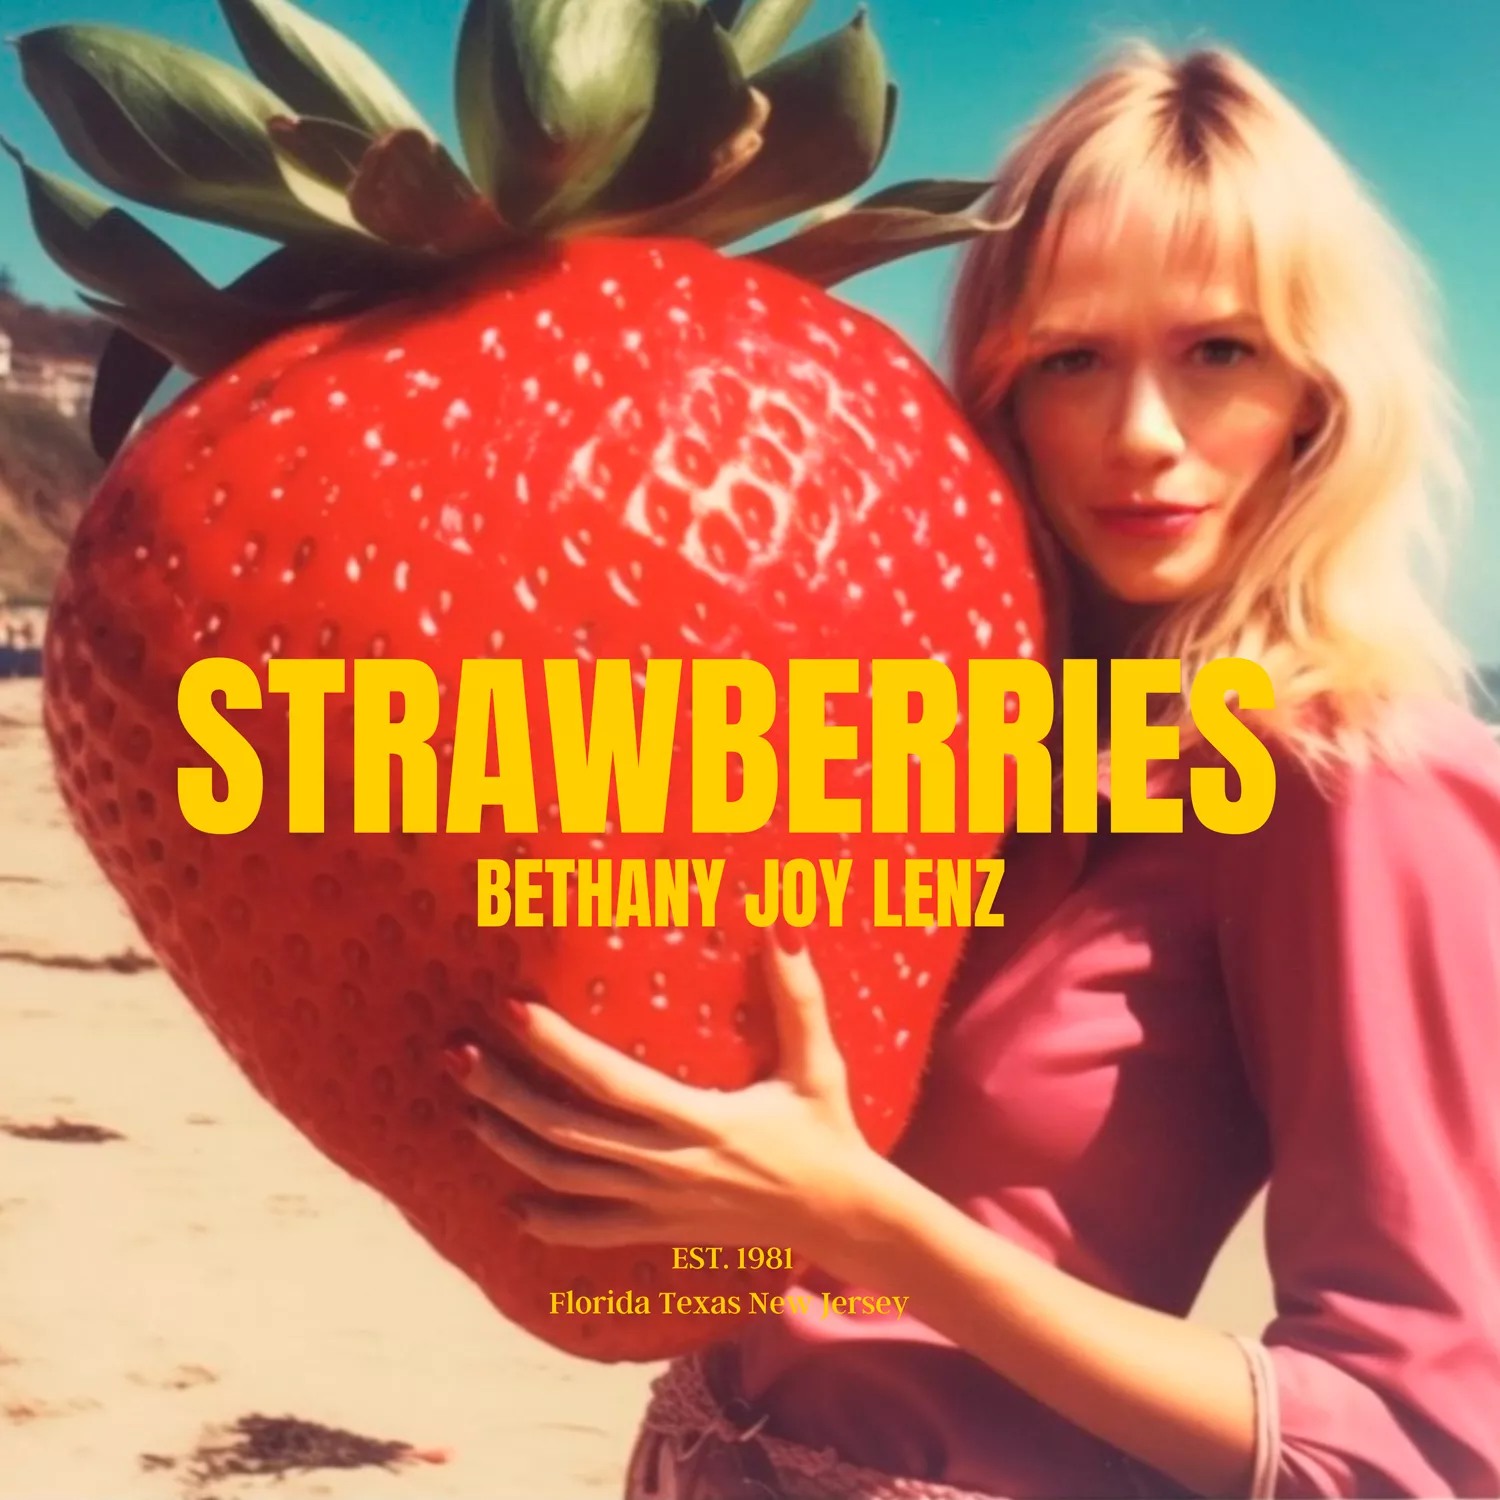 Bethany Joy Lenz’s ‘Playful’ New Single ‘Strawberries’ out Aug 18